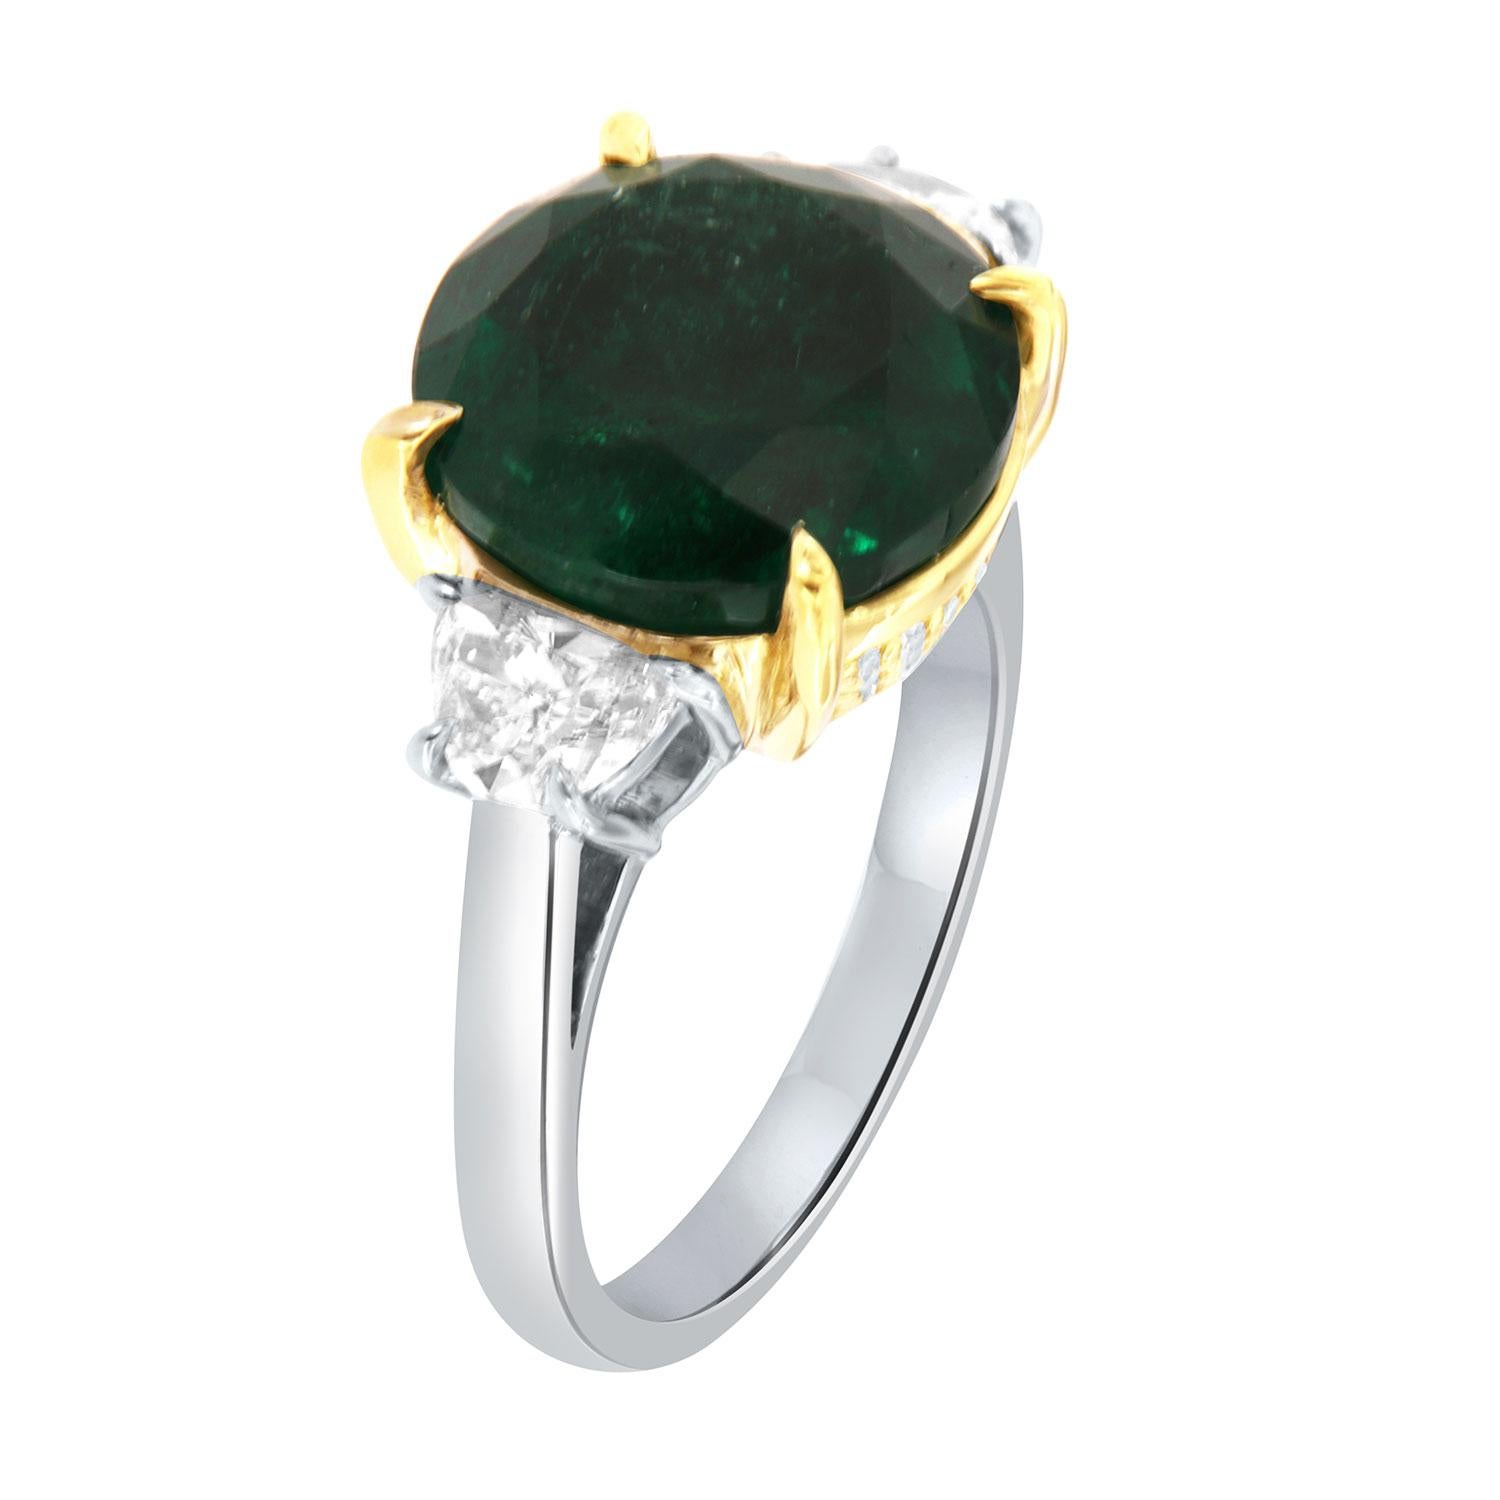 This Stunning Platinum and 18k Yellow Gold ring features a Rare 7.47 Carat Round-shaped Vibrant deep green Natural Emerald flanked by two(2) Half-Moon shaped diamonds in a total weight of 0.70 Carat. A total of thirty (30) Brilliant round diamonds